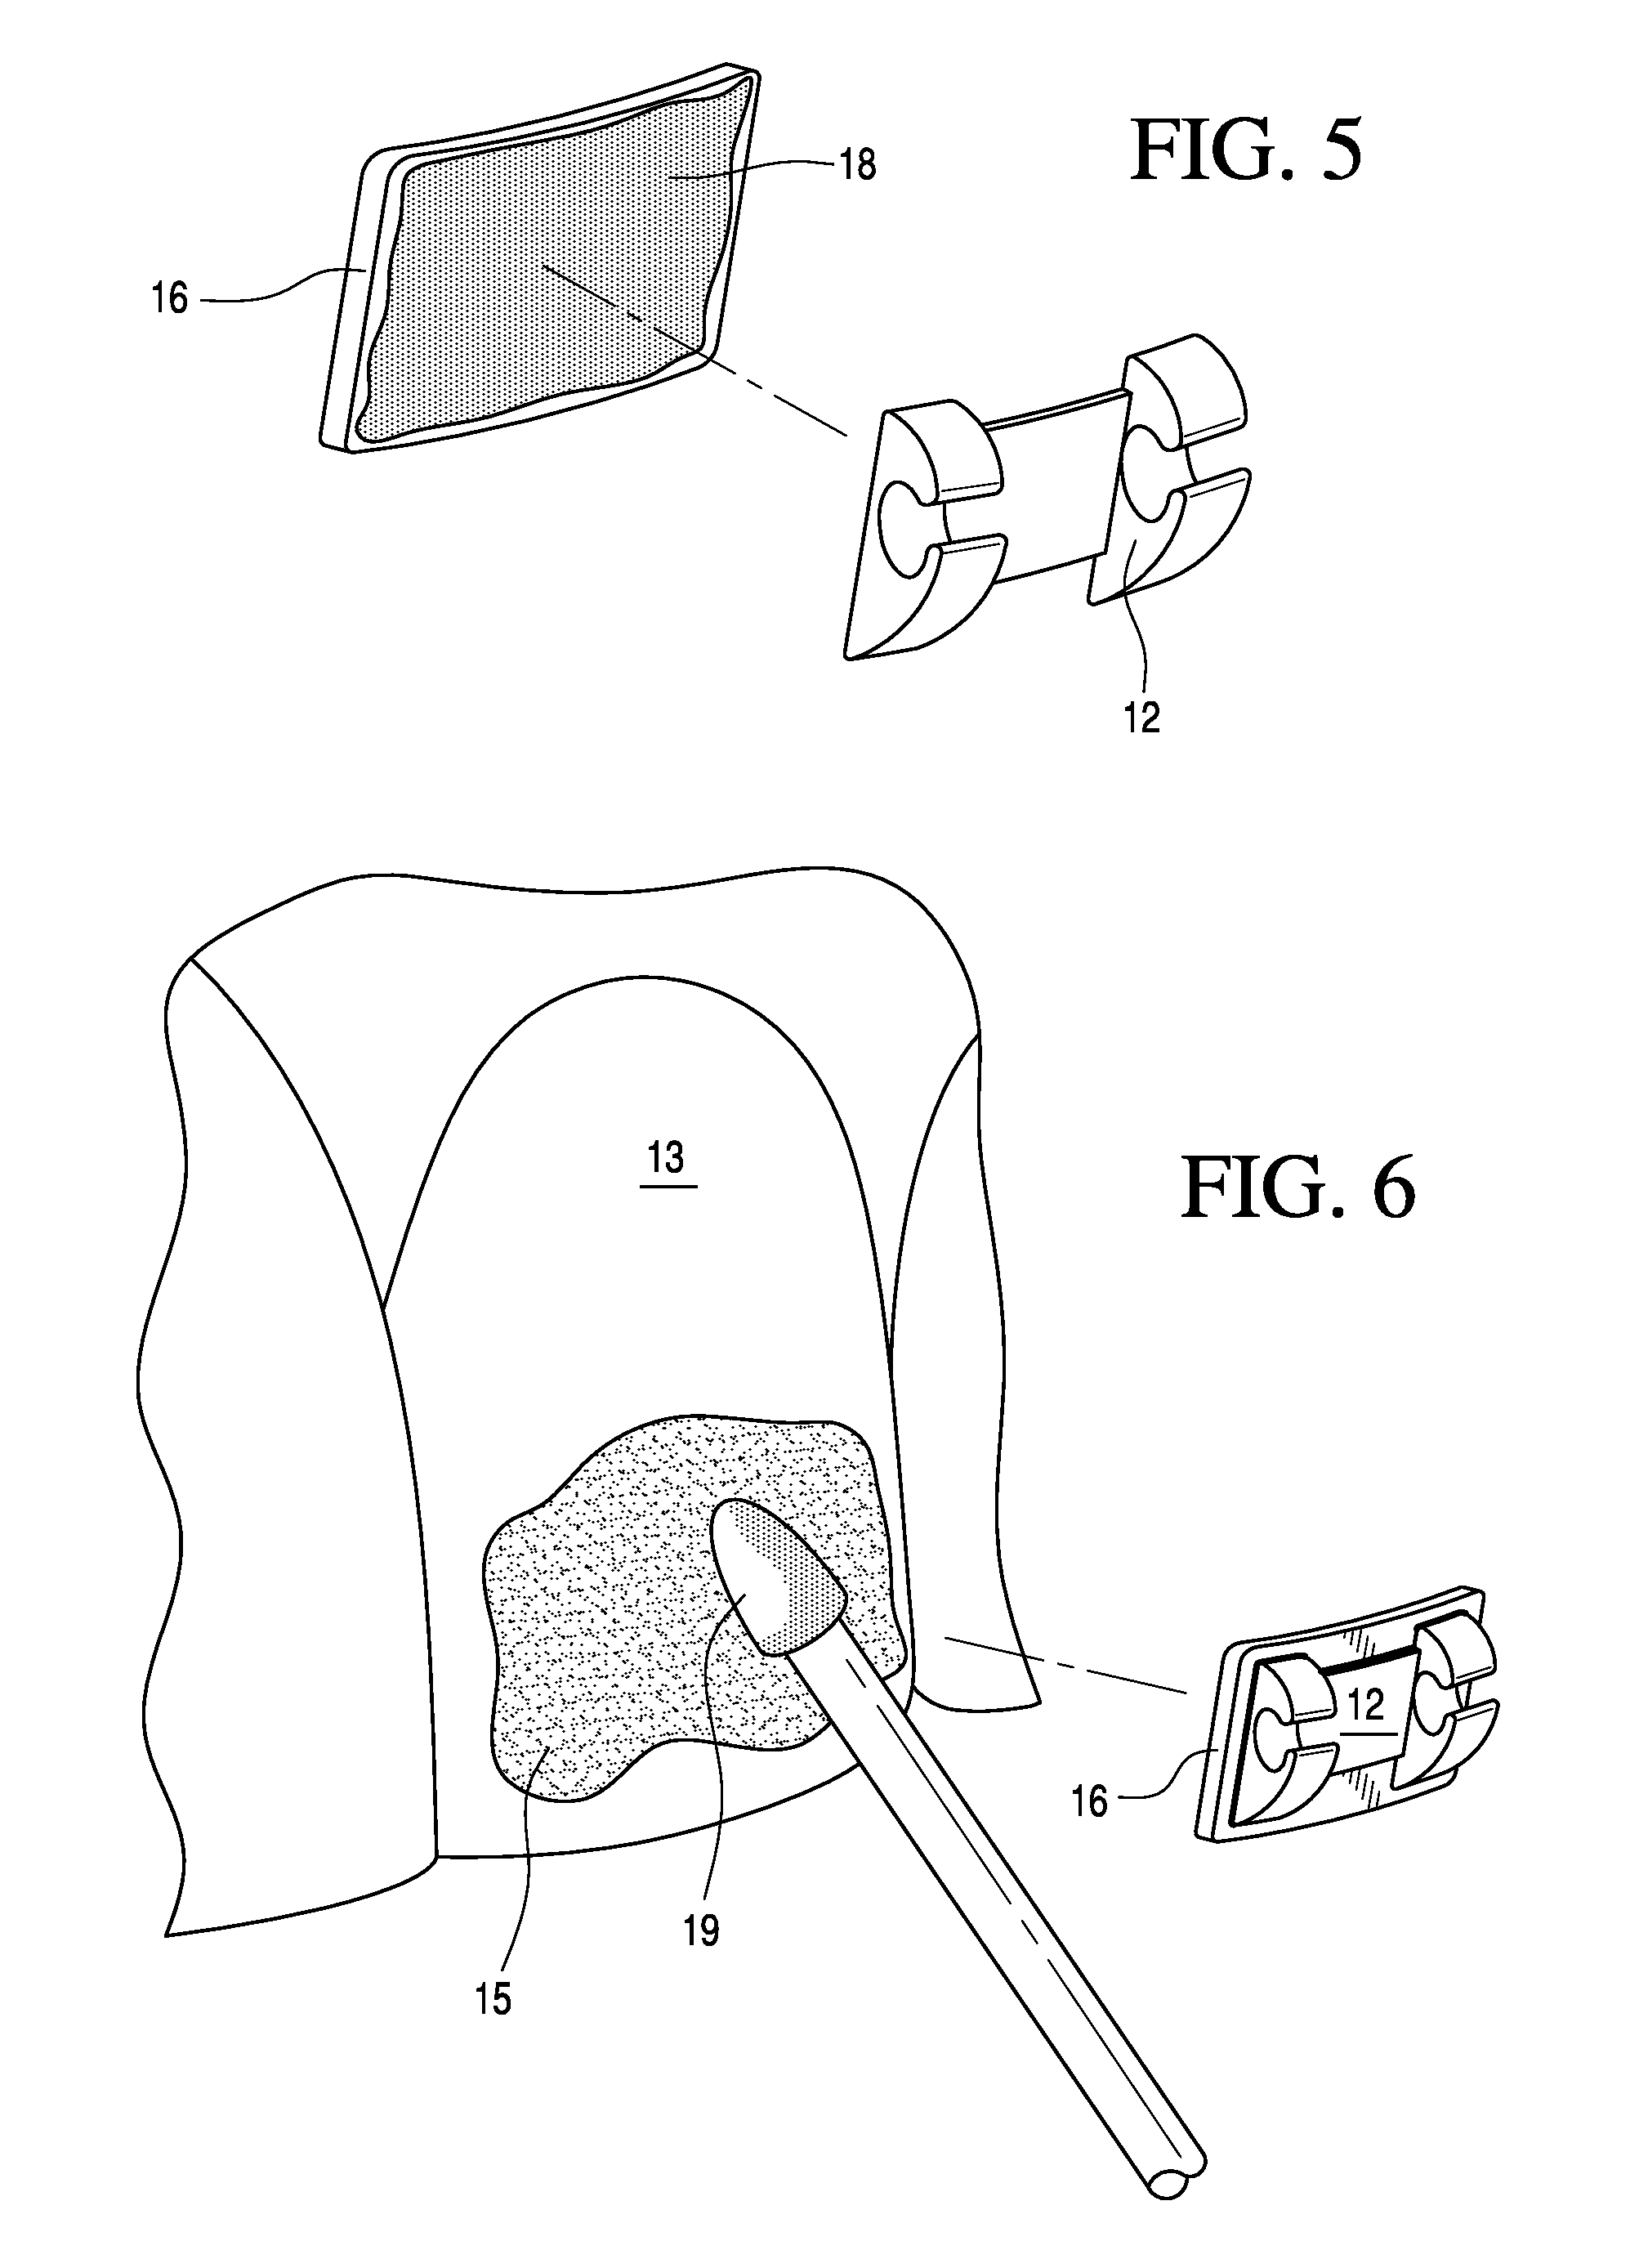 Adjustable orthodontic bracket and method using a microstructured shape memory polymer surface with reversible dry adhesion